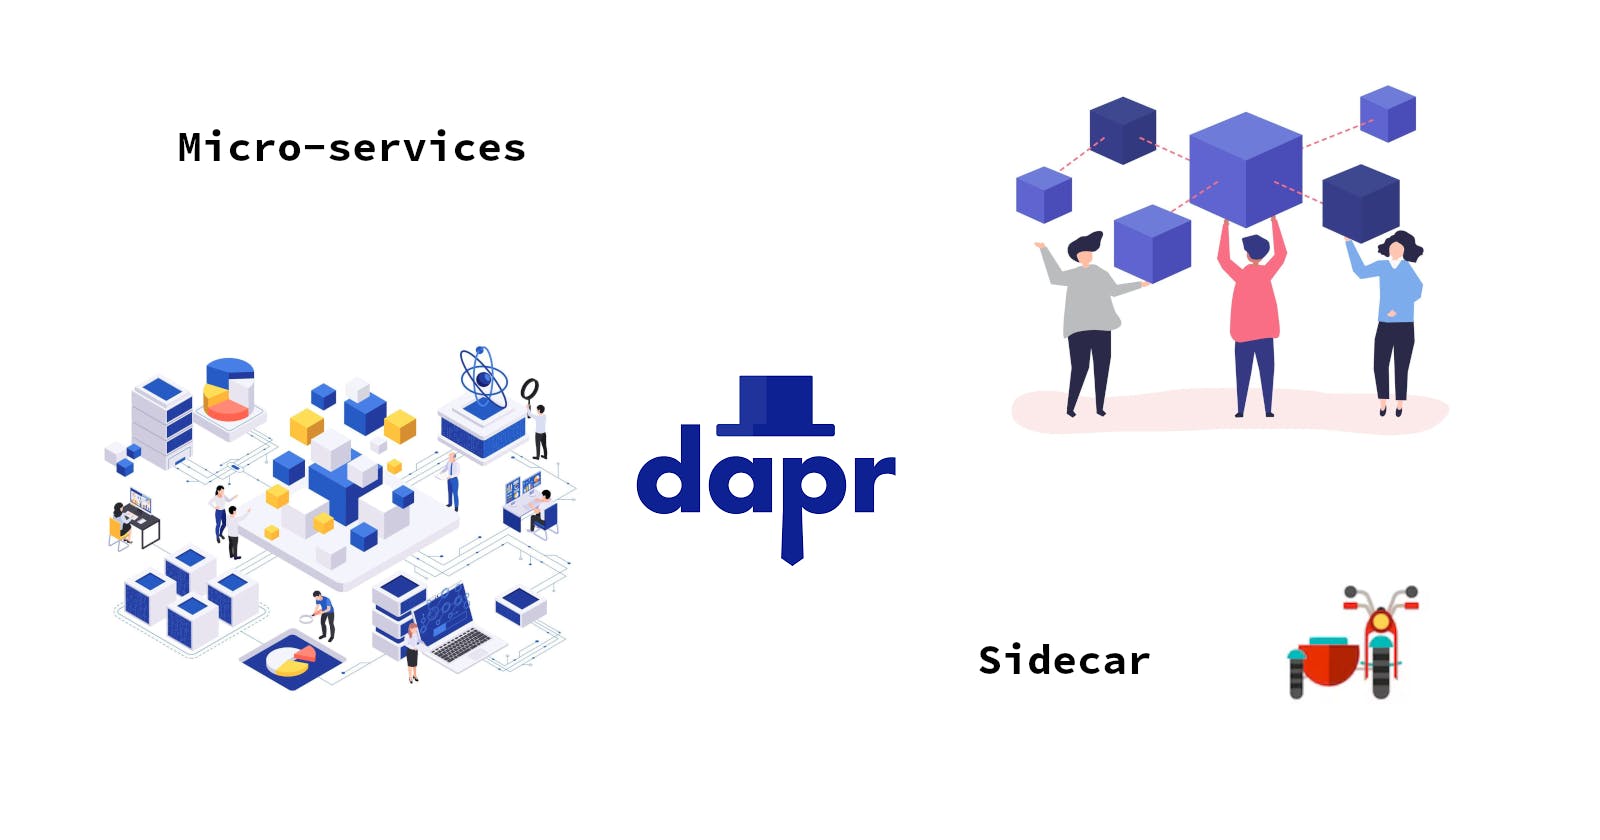 What is Dapr?